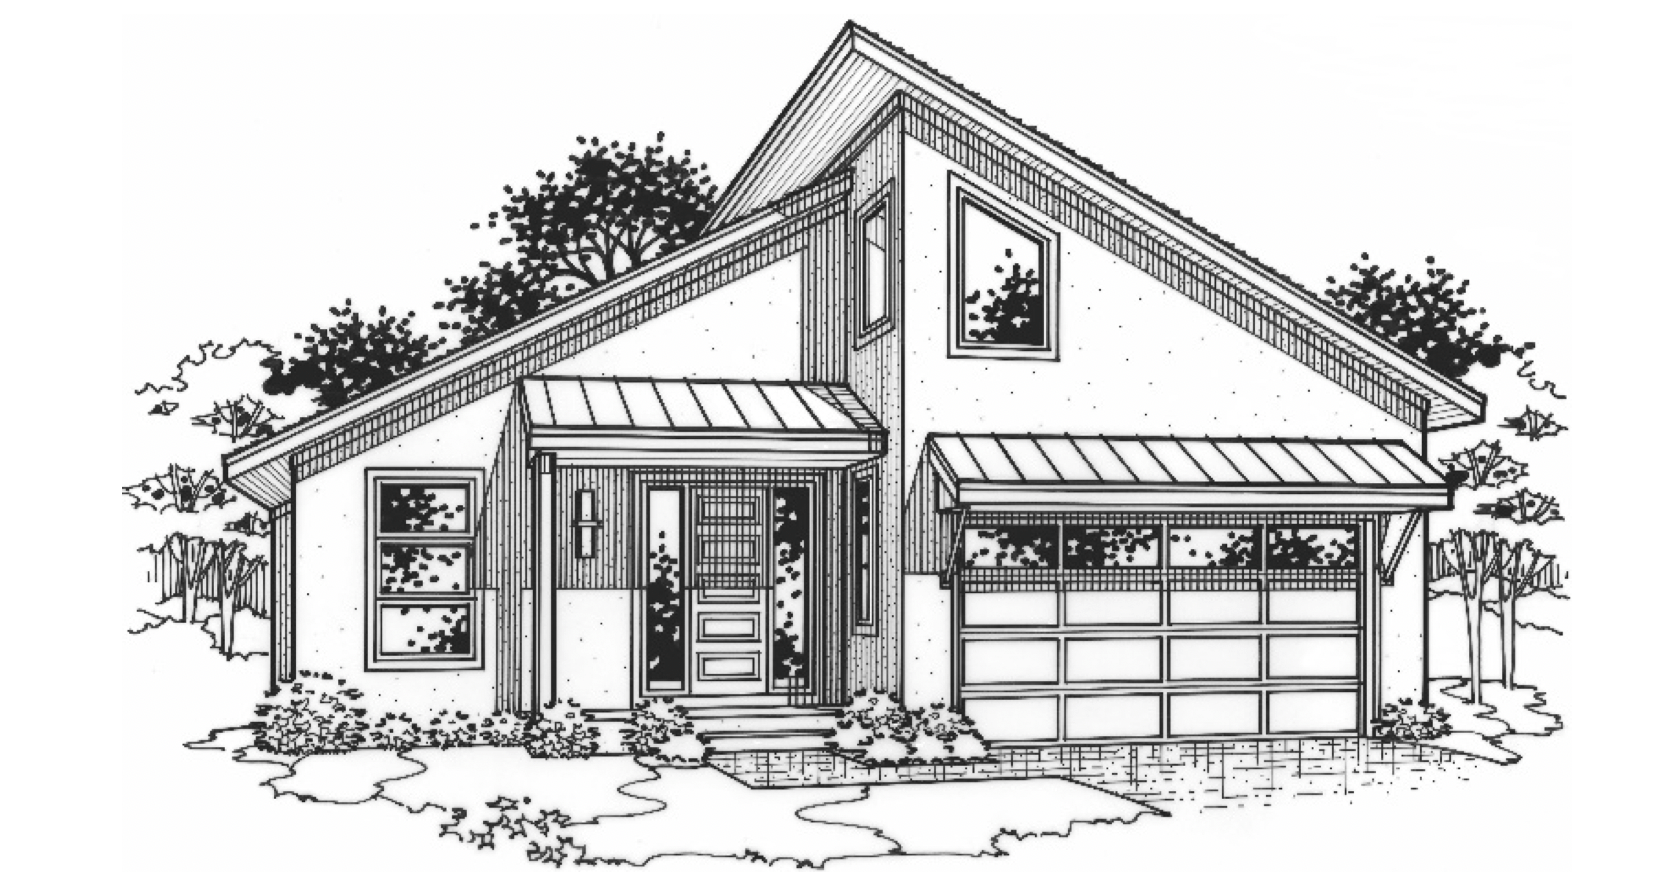 Black and white front elevation of the Holly model from Lambie Homes